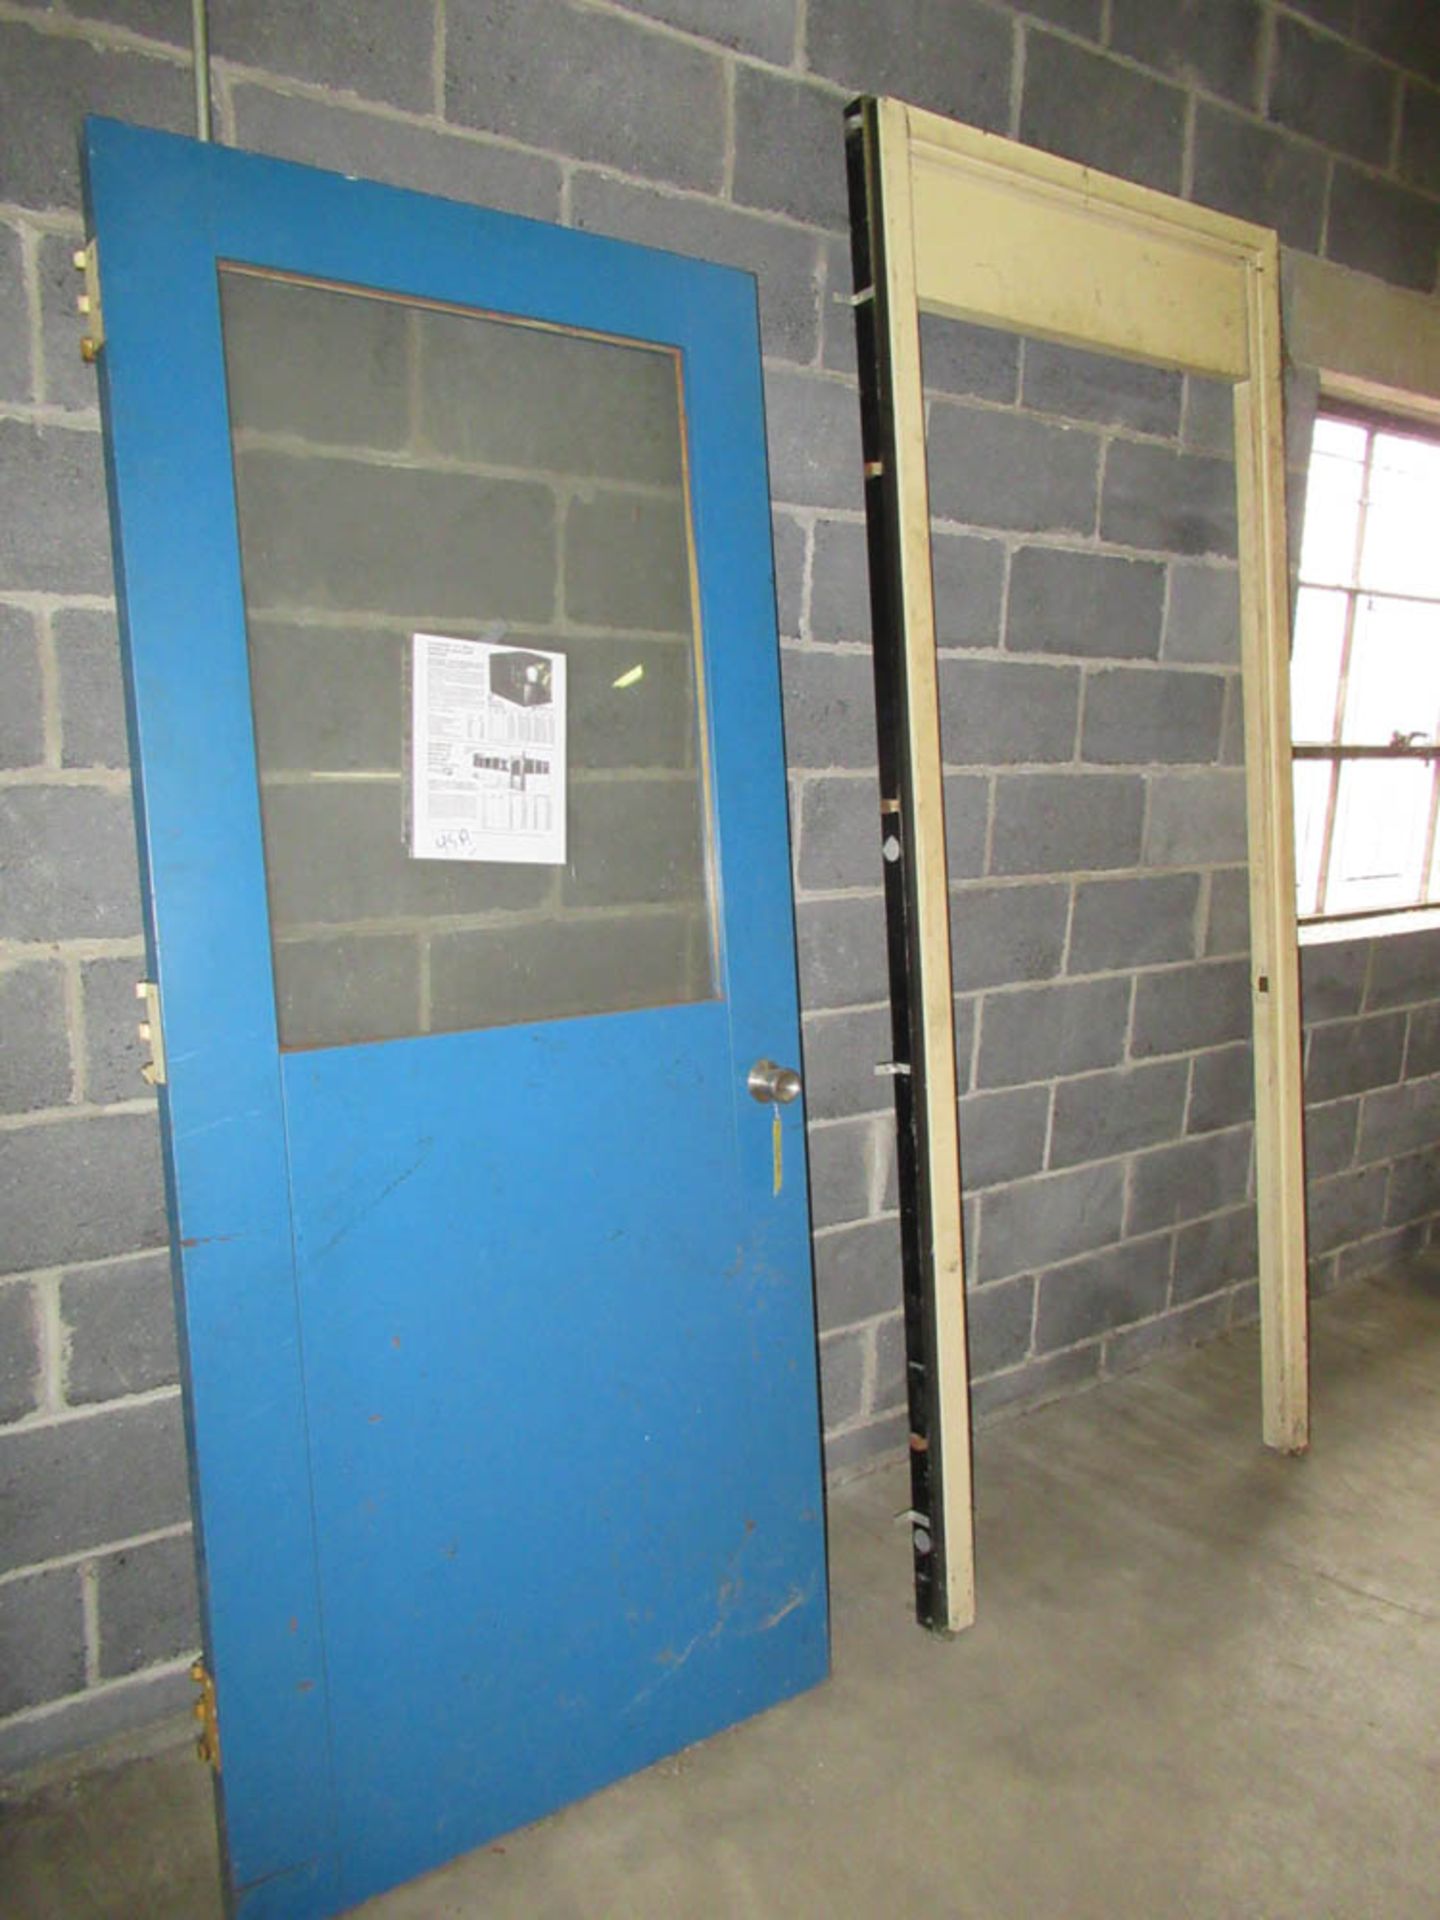 3-SIDED MODULAR OFFICE WITH DOOR (DISMANTLED), IMPLANT WINDOW, DOOR 8' X 8, (6) 4' SECTIONS